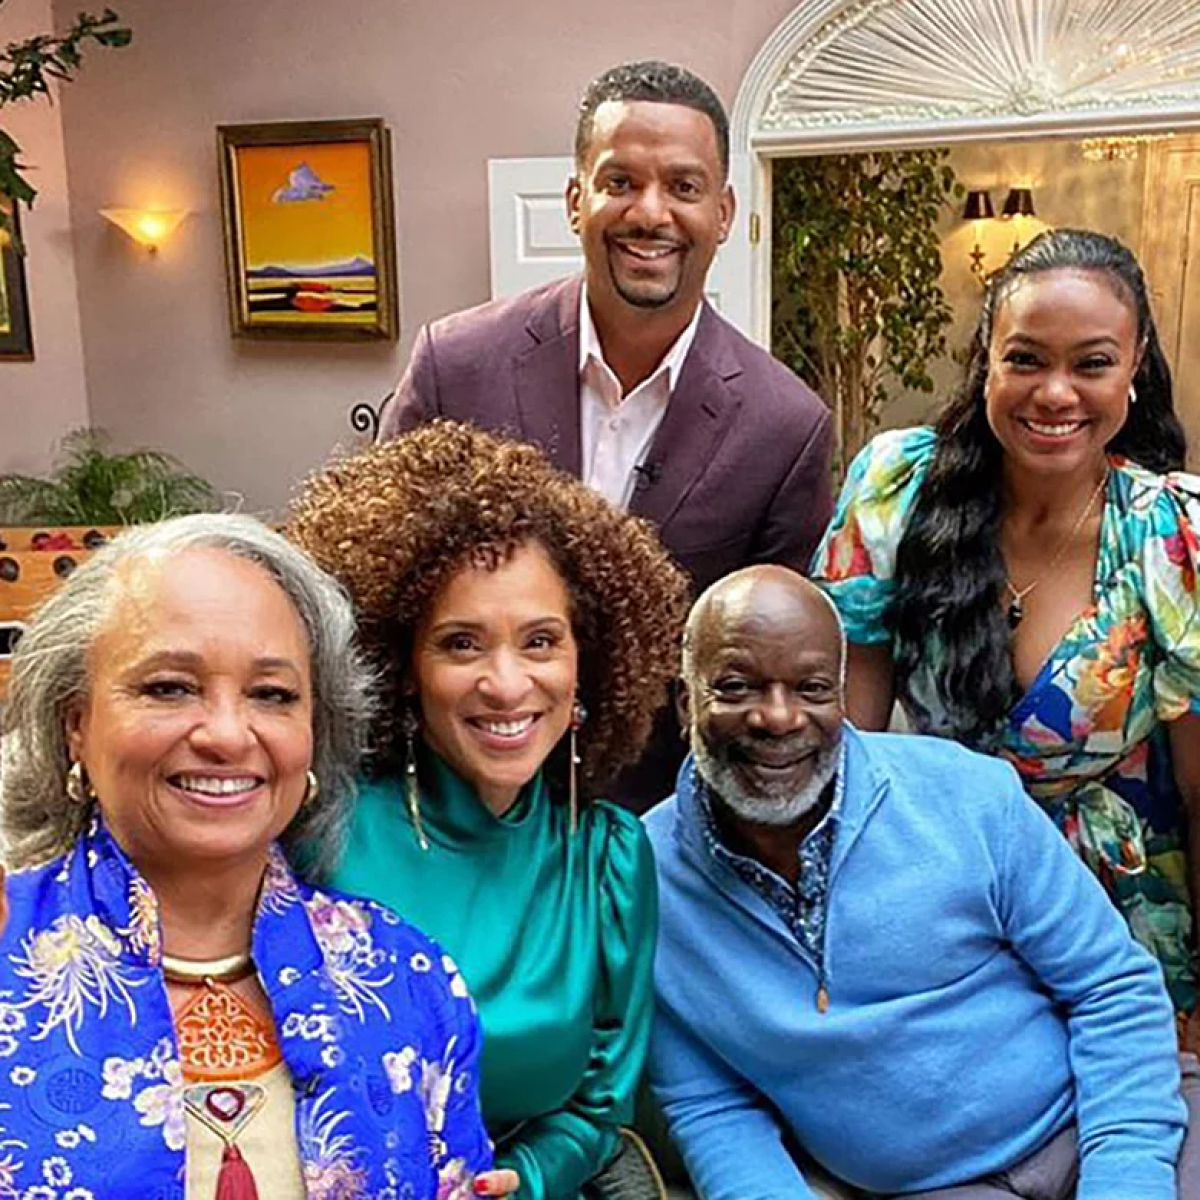 7 Things We Learned From the ‘Fresh Prince of Bel-Air’ Reunion